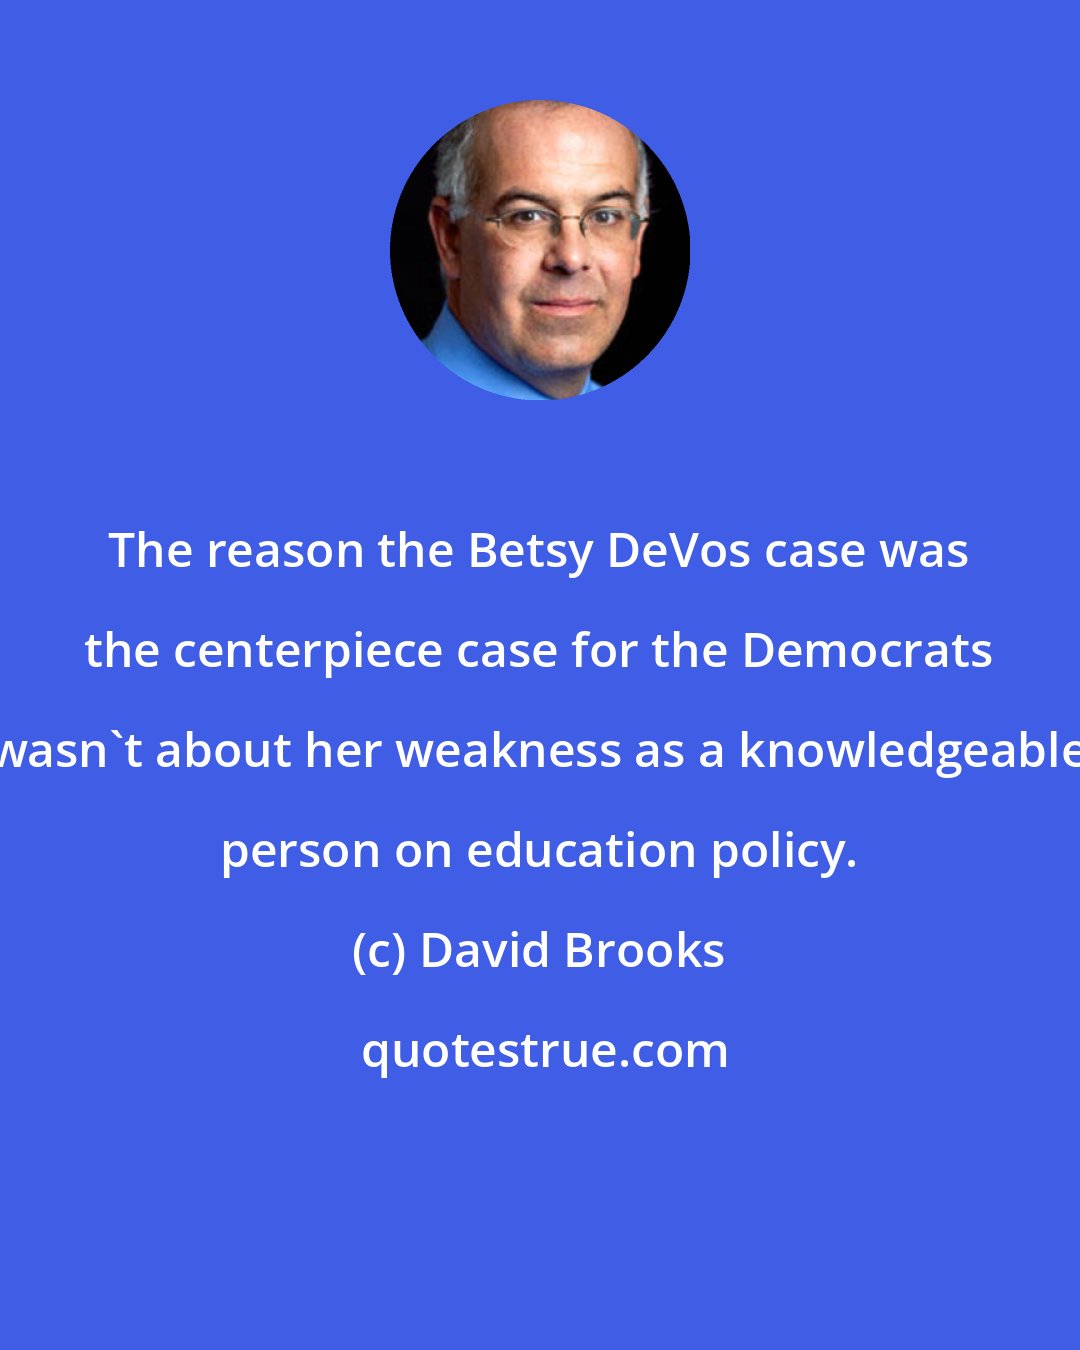 David Brooks: The reason the Betsy DeVos case was the centerpiece case for the Democrats wasn't about her weakness as a knowledgeable person on education policy.